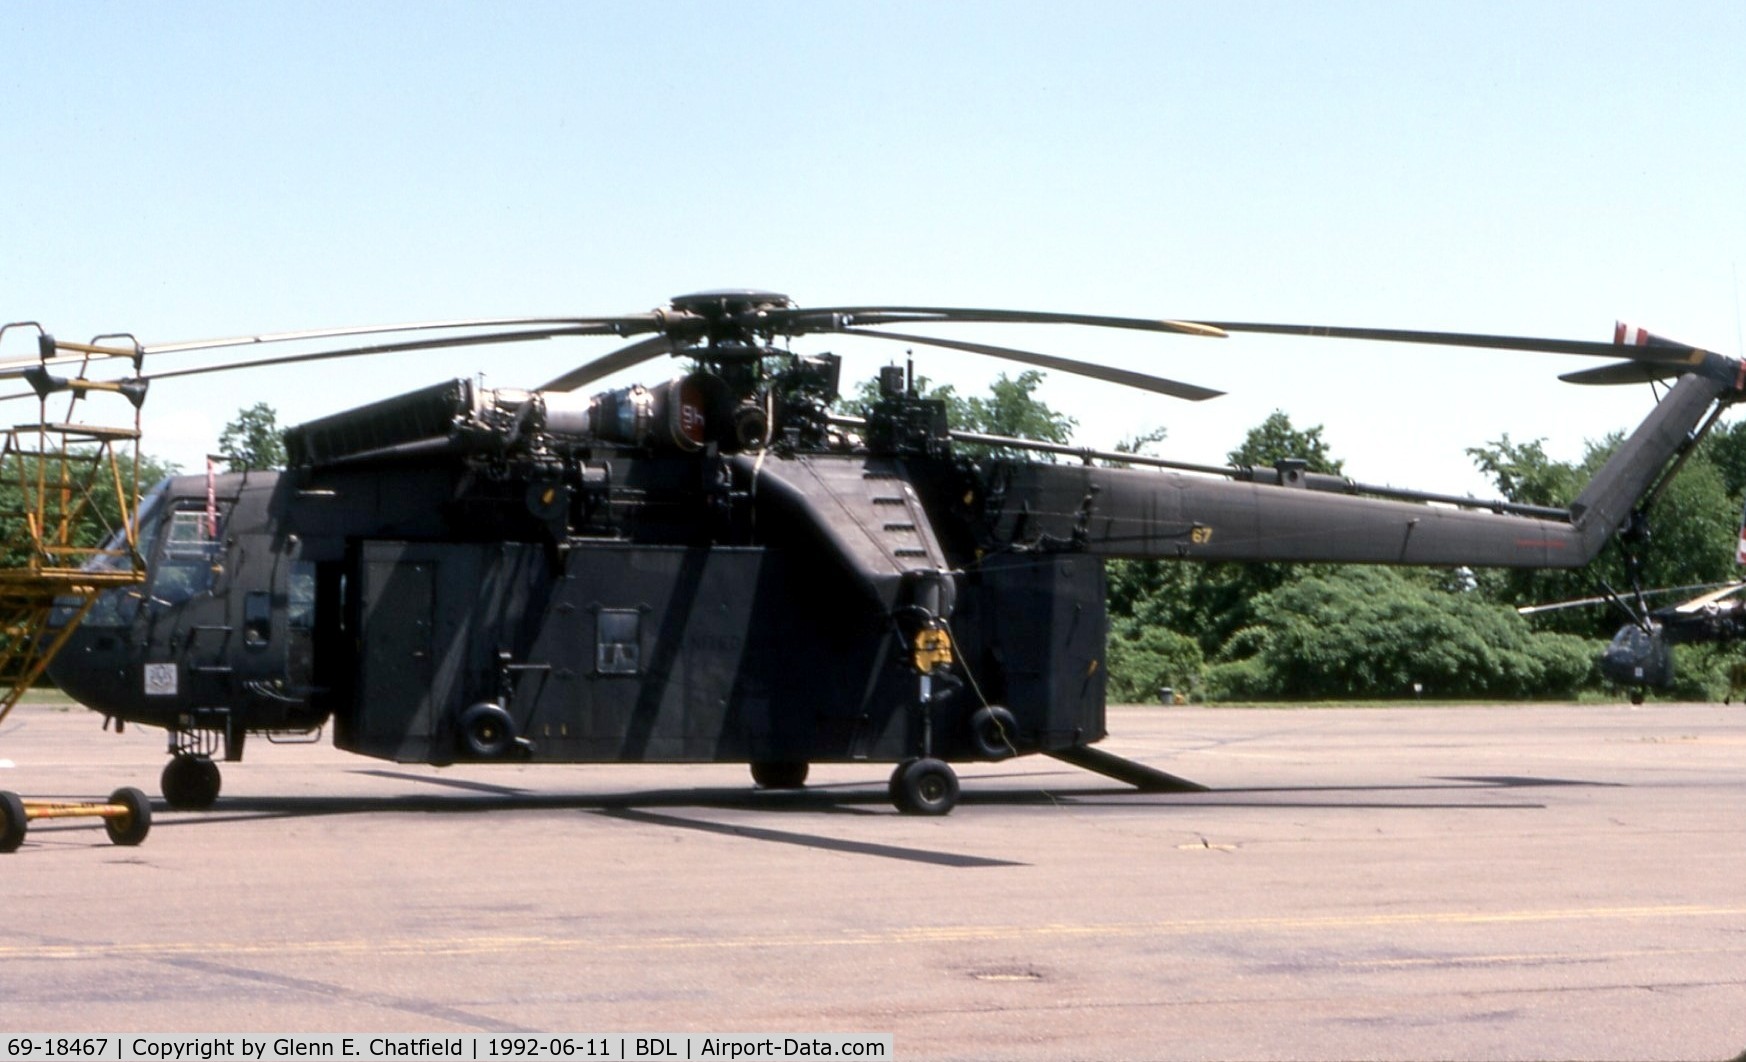 69-18467, 1969 Sikorsky CH-54B Tarhe C/N 64-074, CH-54B 69-18467 when still active with the Army